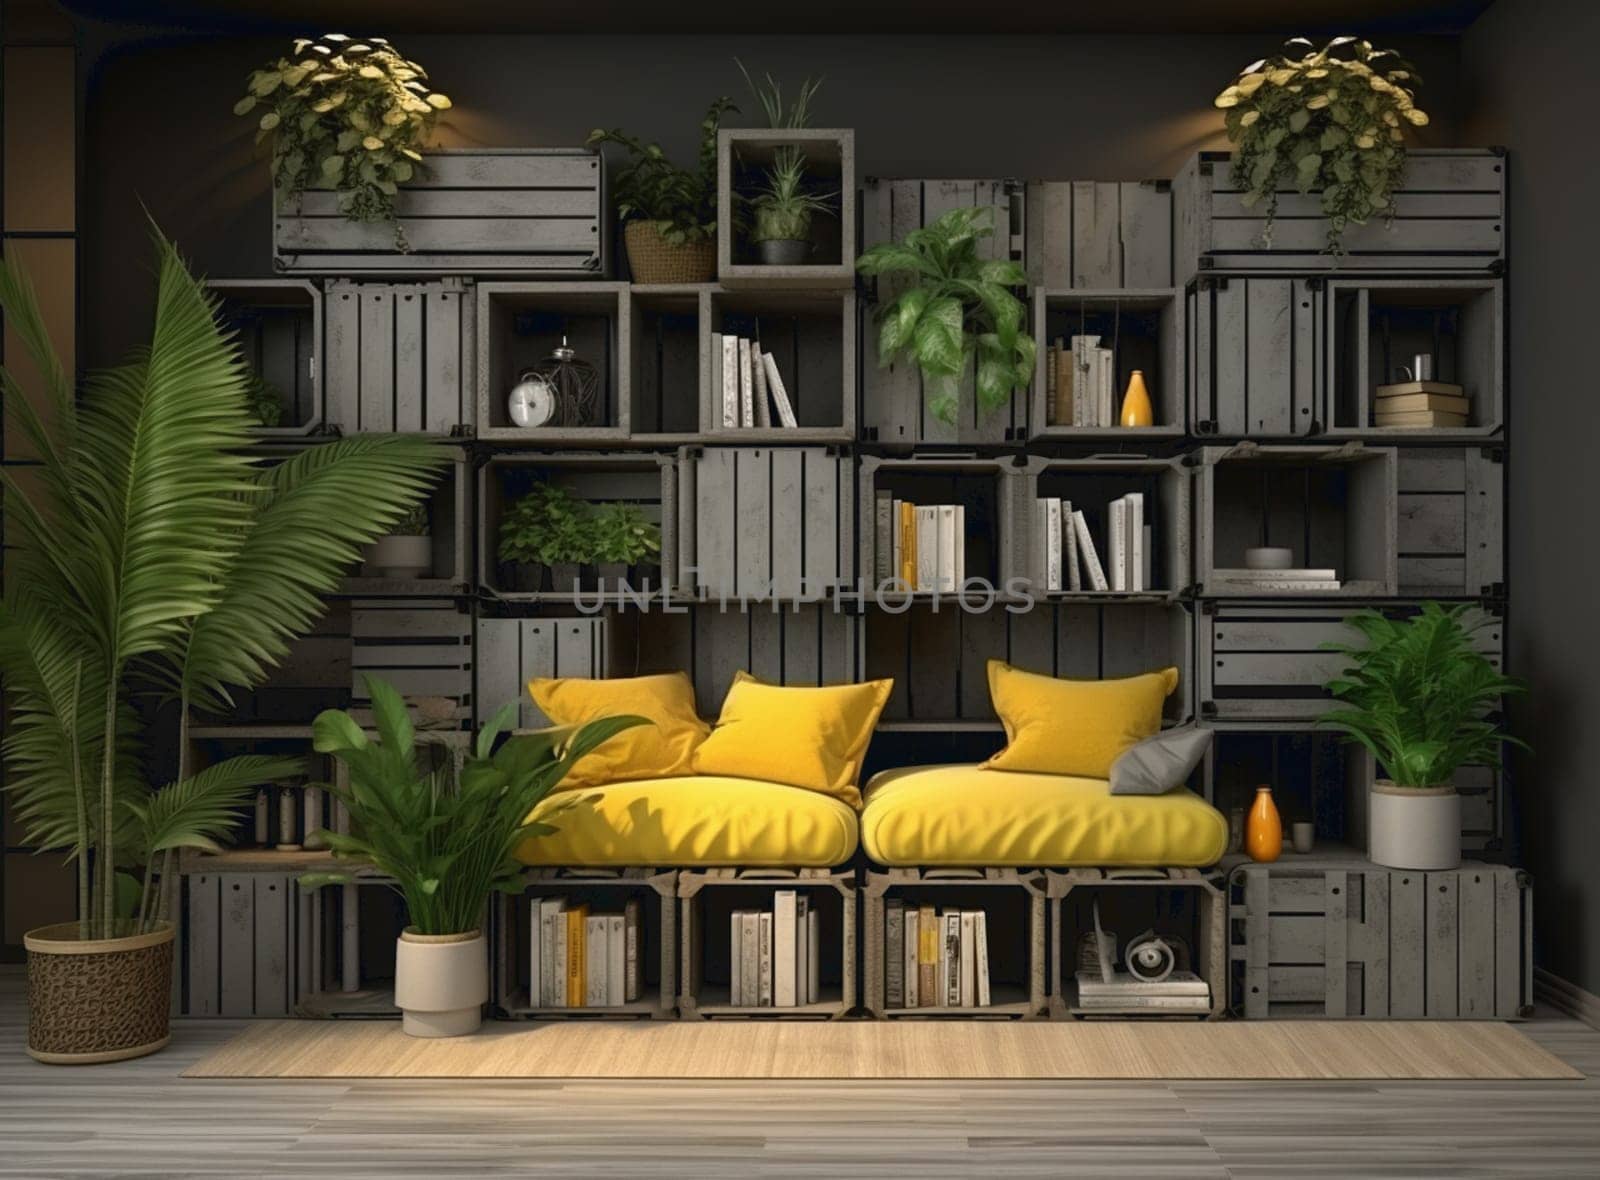 Home garden, minimal bedroom in yellow and wooden tones. Master bed, parquet floor and many houseplants. Urban jungle interior design. Biophilia concept, 3d illustration by Andelov13